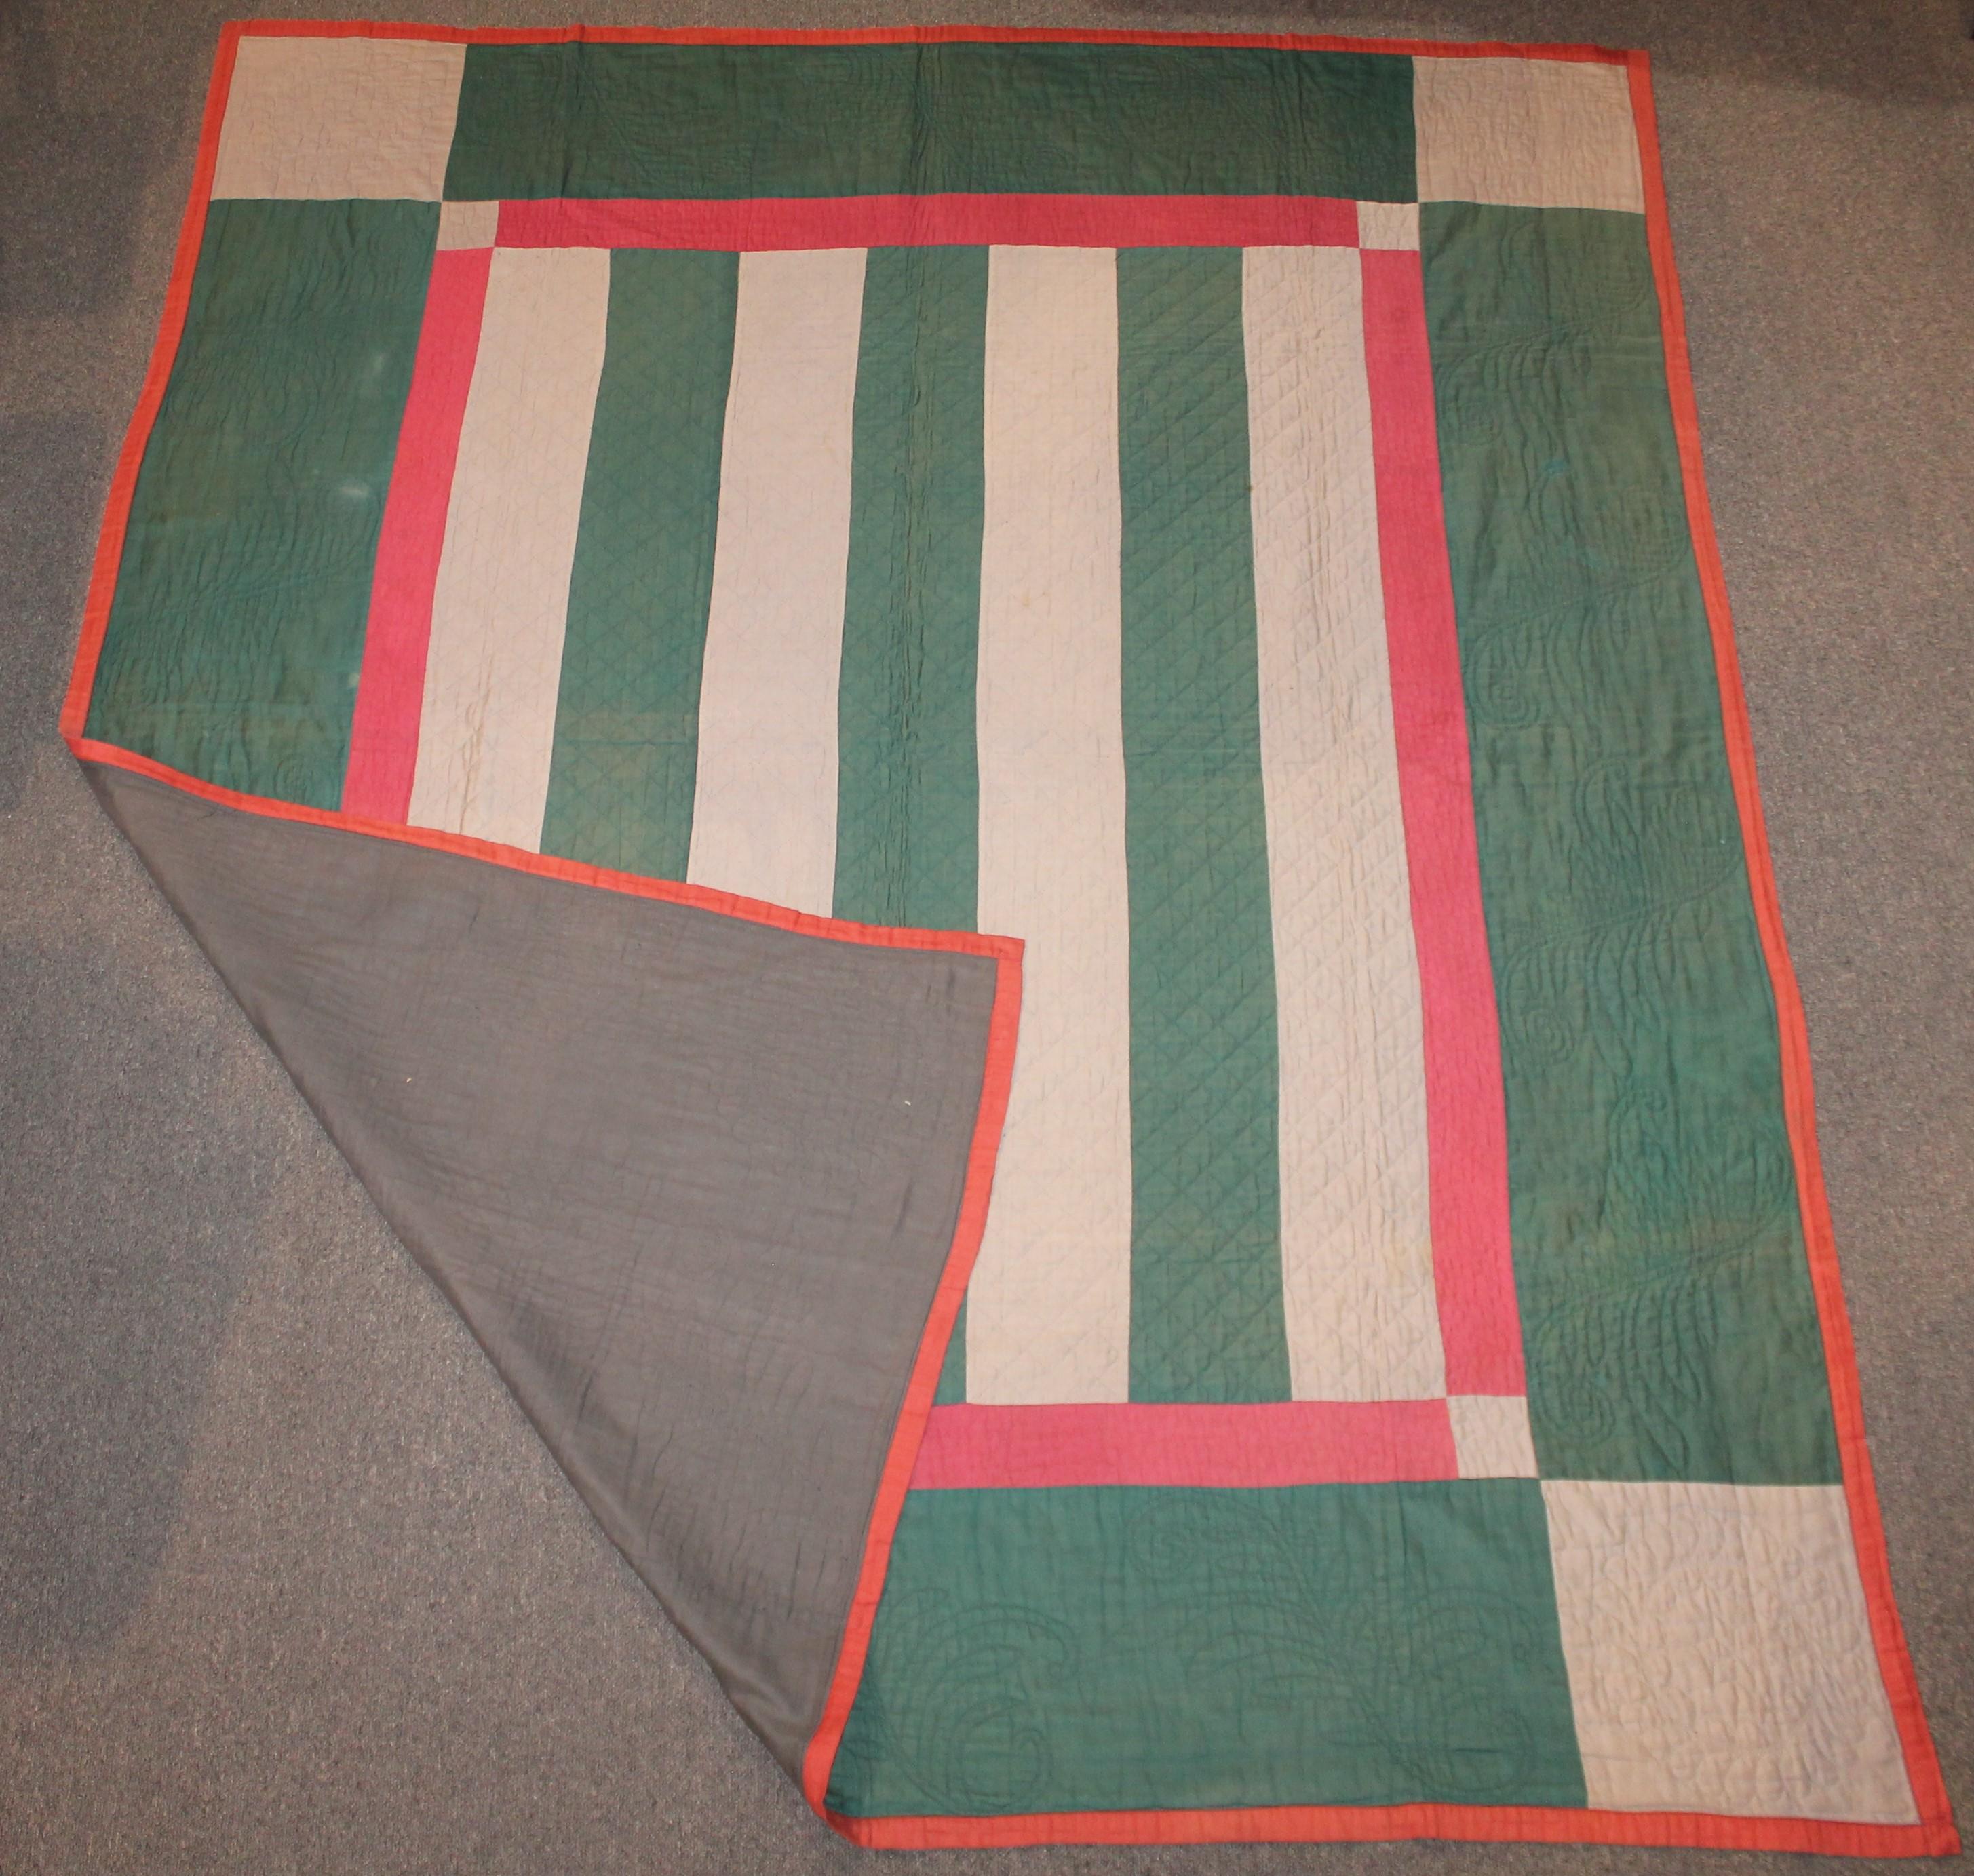 Antique Amish Bars quilt from Lancaster County, Pennsylvania. This quilt is from the 1930s wool and cotton sateen. The condition is very good with minor spots in area to be expected.